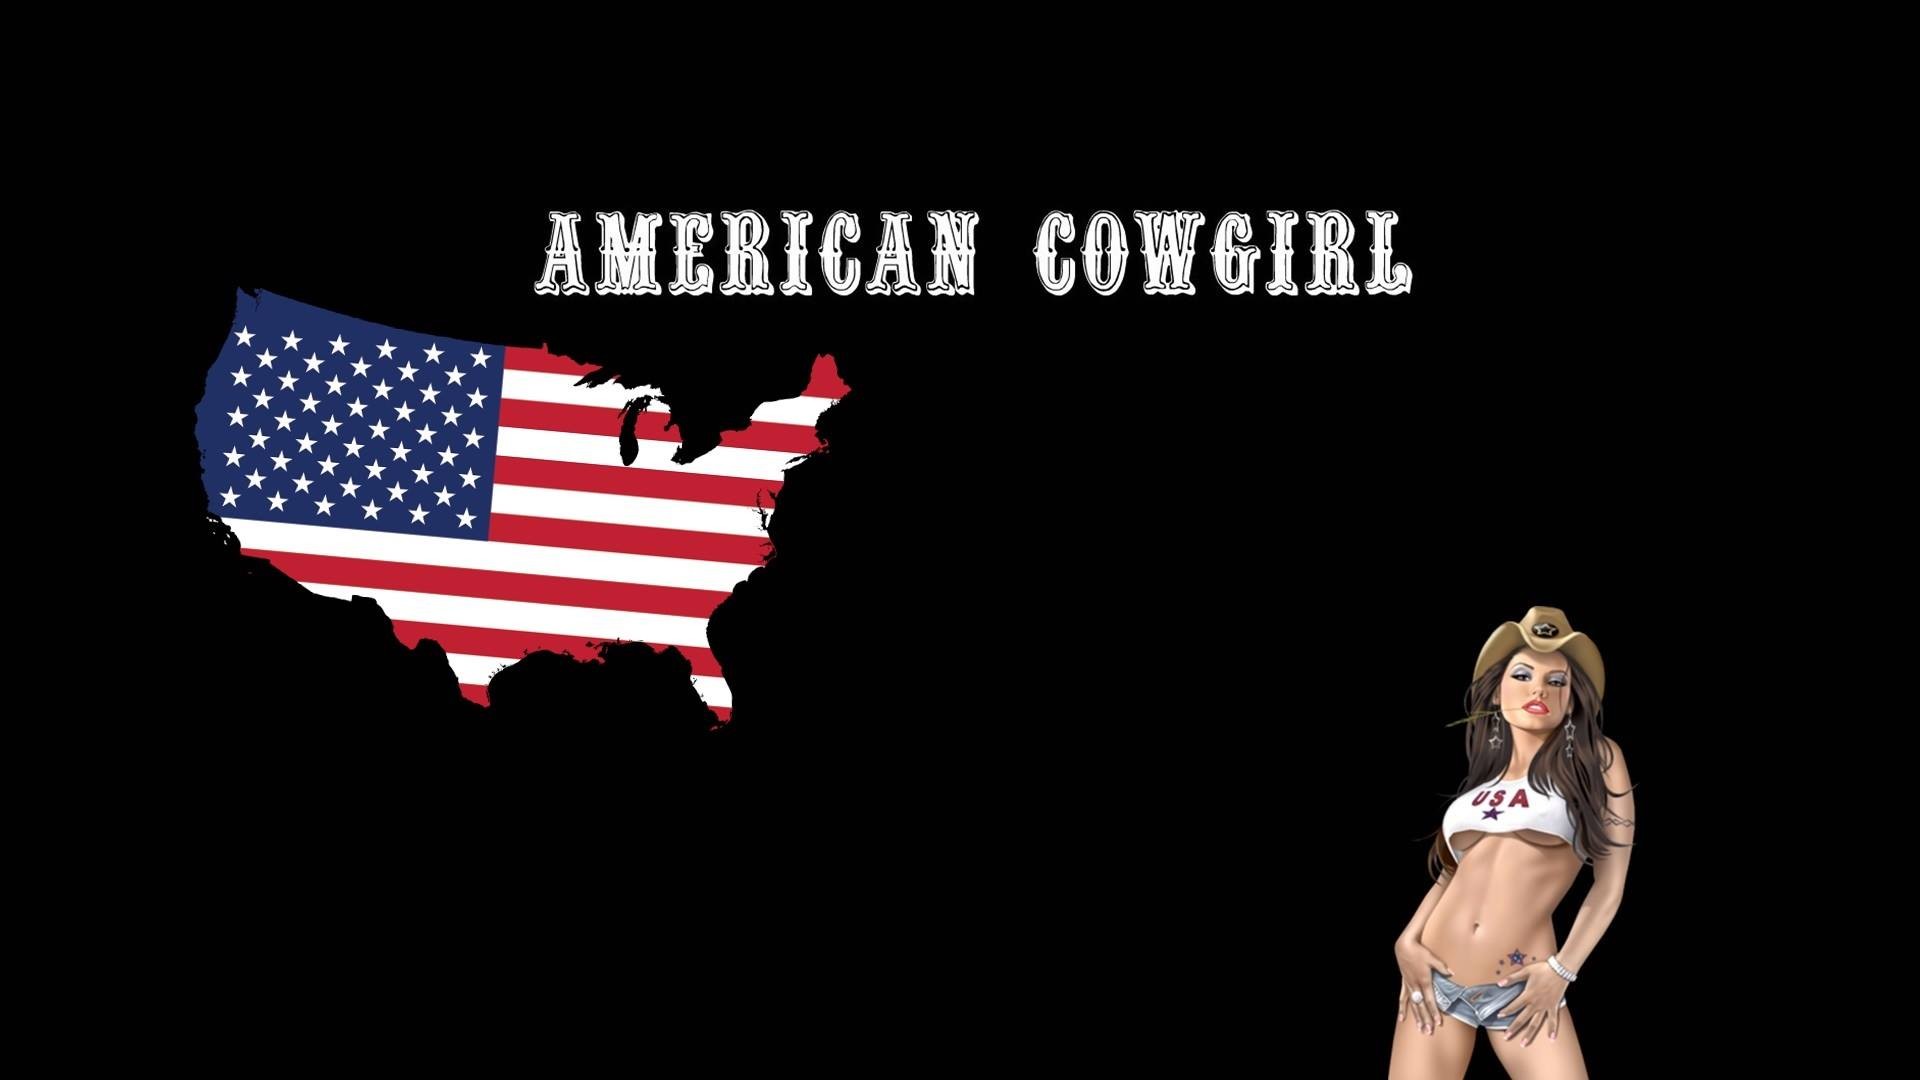 General 1920x1080 American flag cowgirl USA The art of Garv flag belly hat women with hats simple background black background looking at viewer brunette artwork